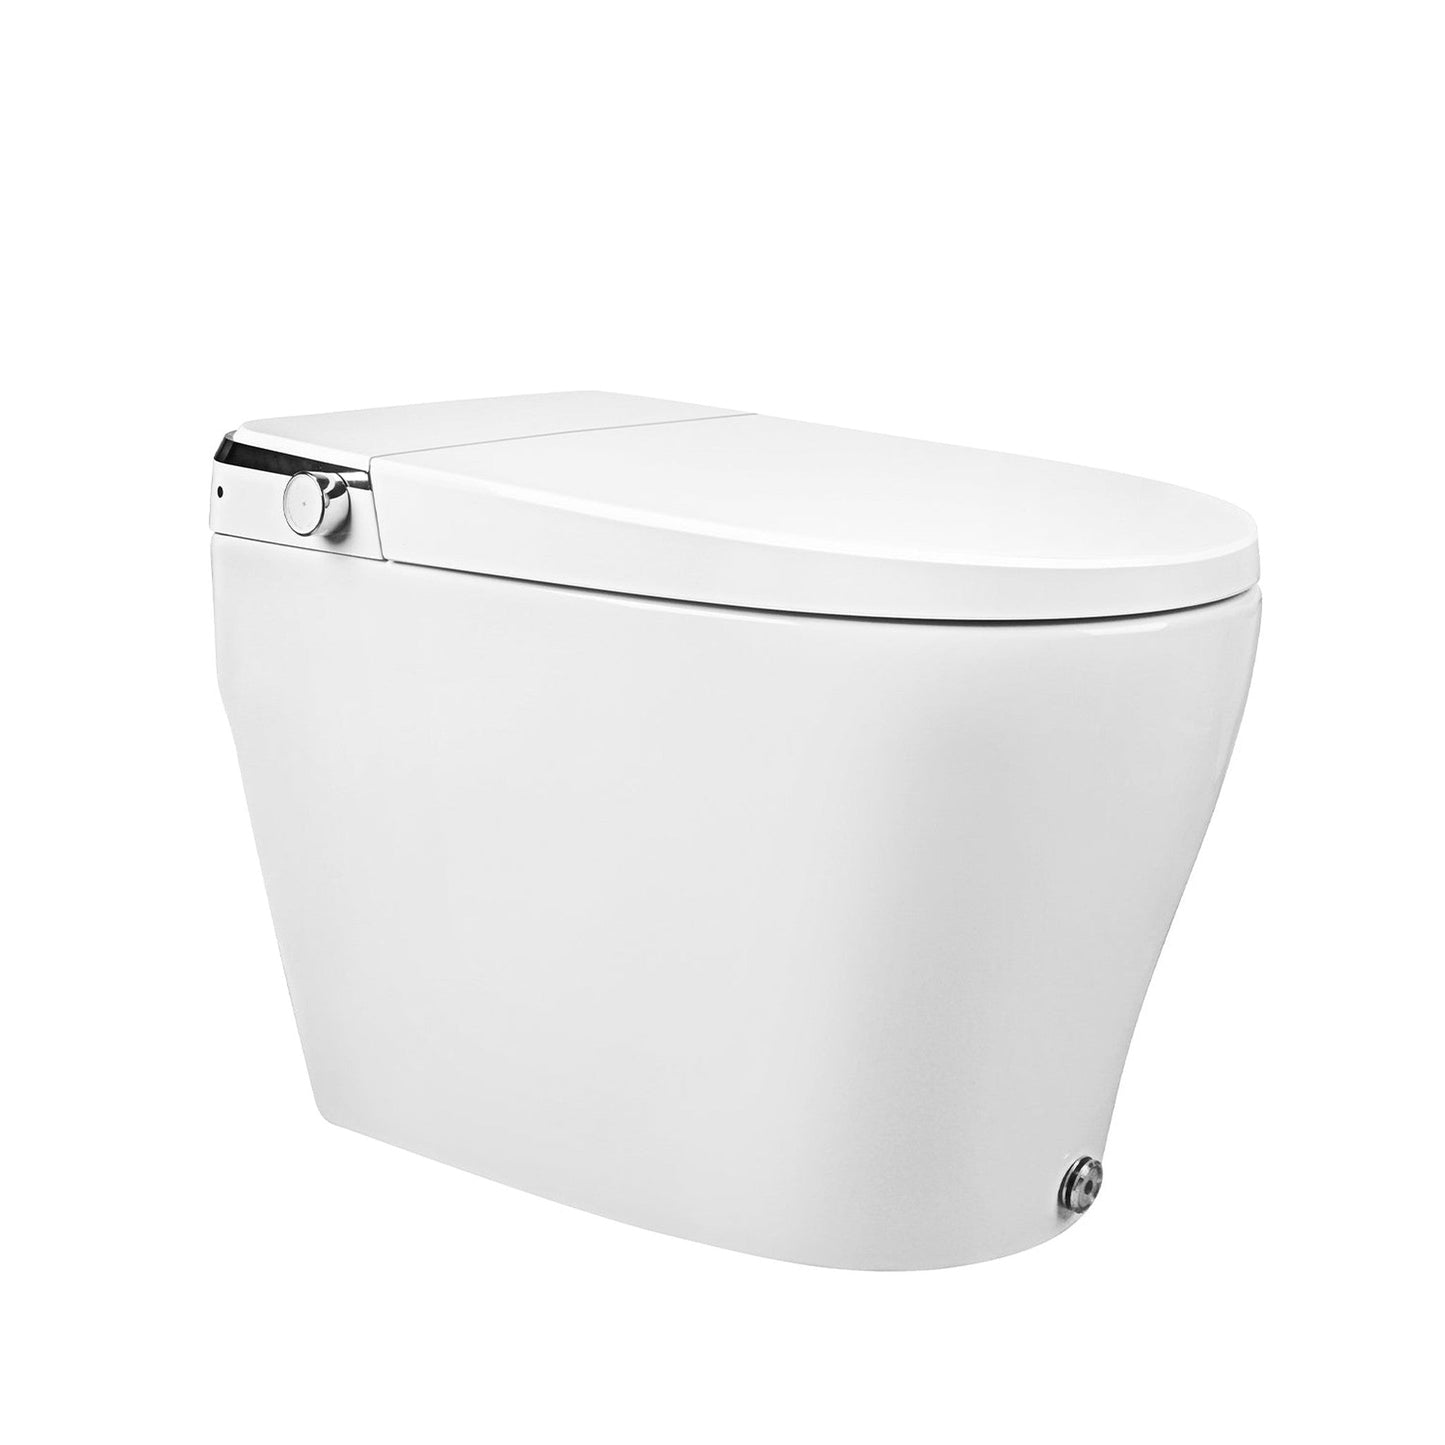 DeerValley One-Piece White Elongated Warm Wash Smart Bidet Toilet With Foot Kick Flush and Seat